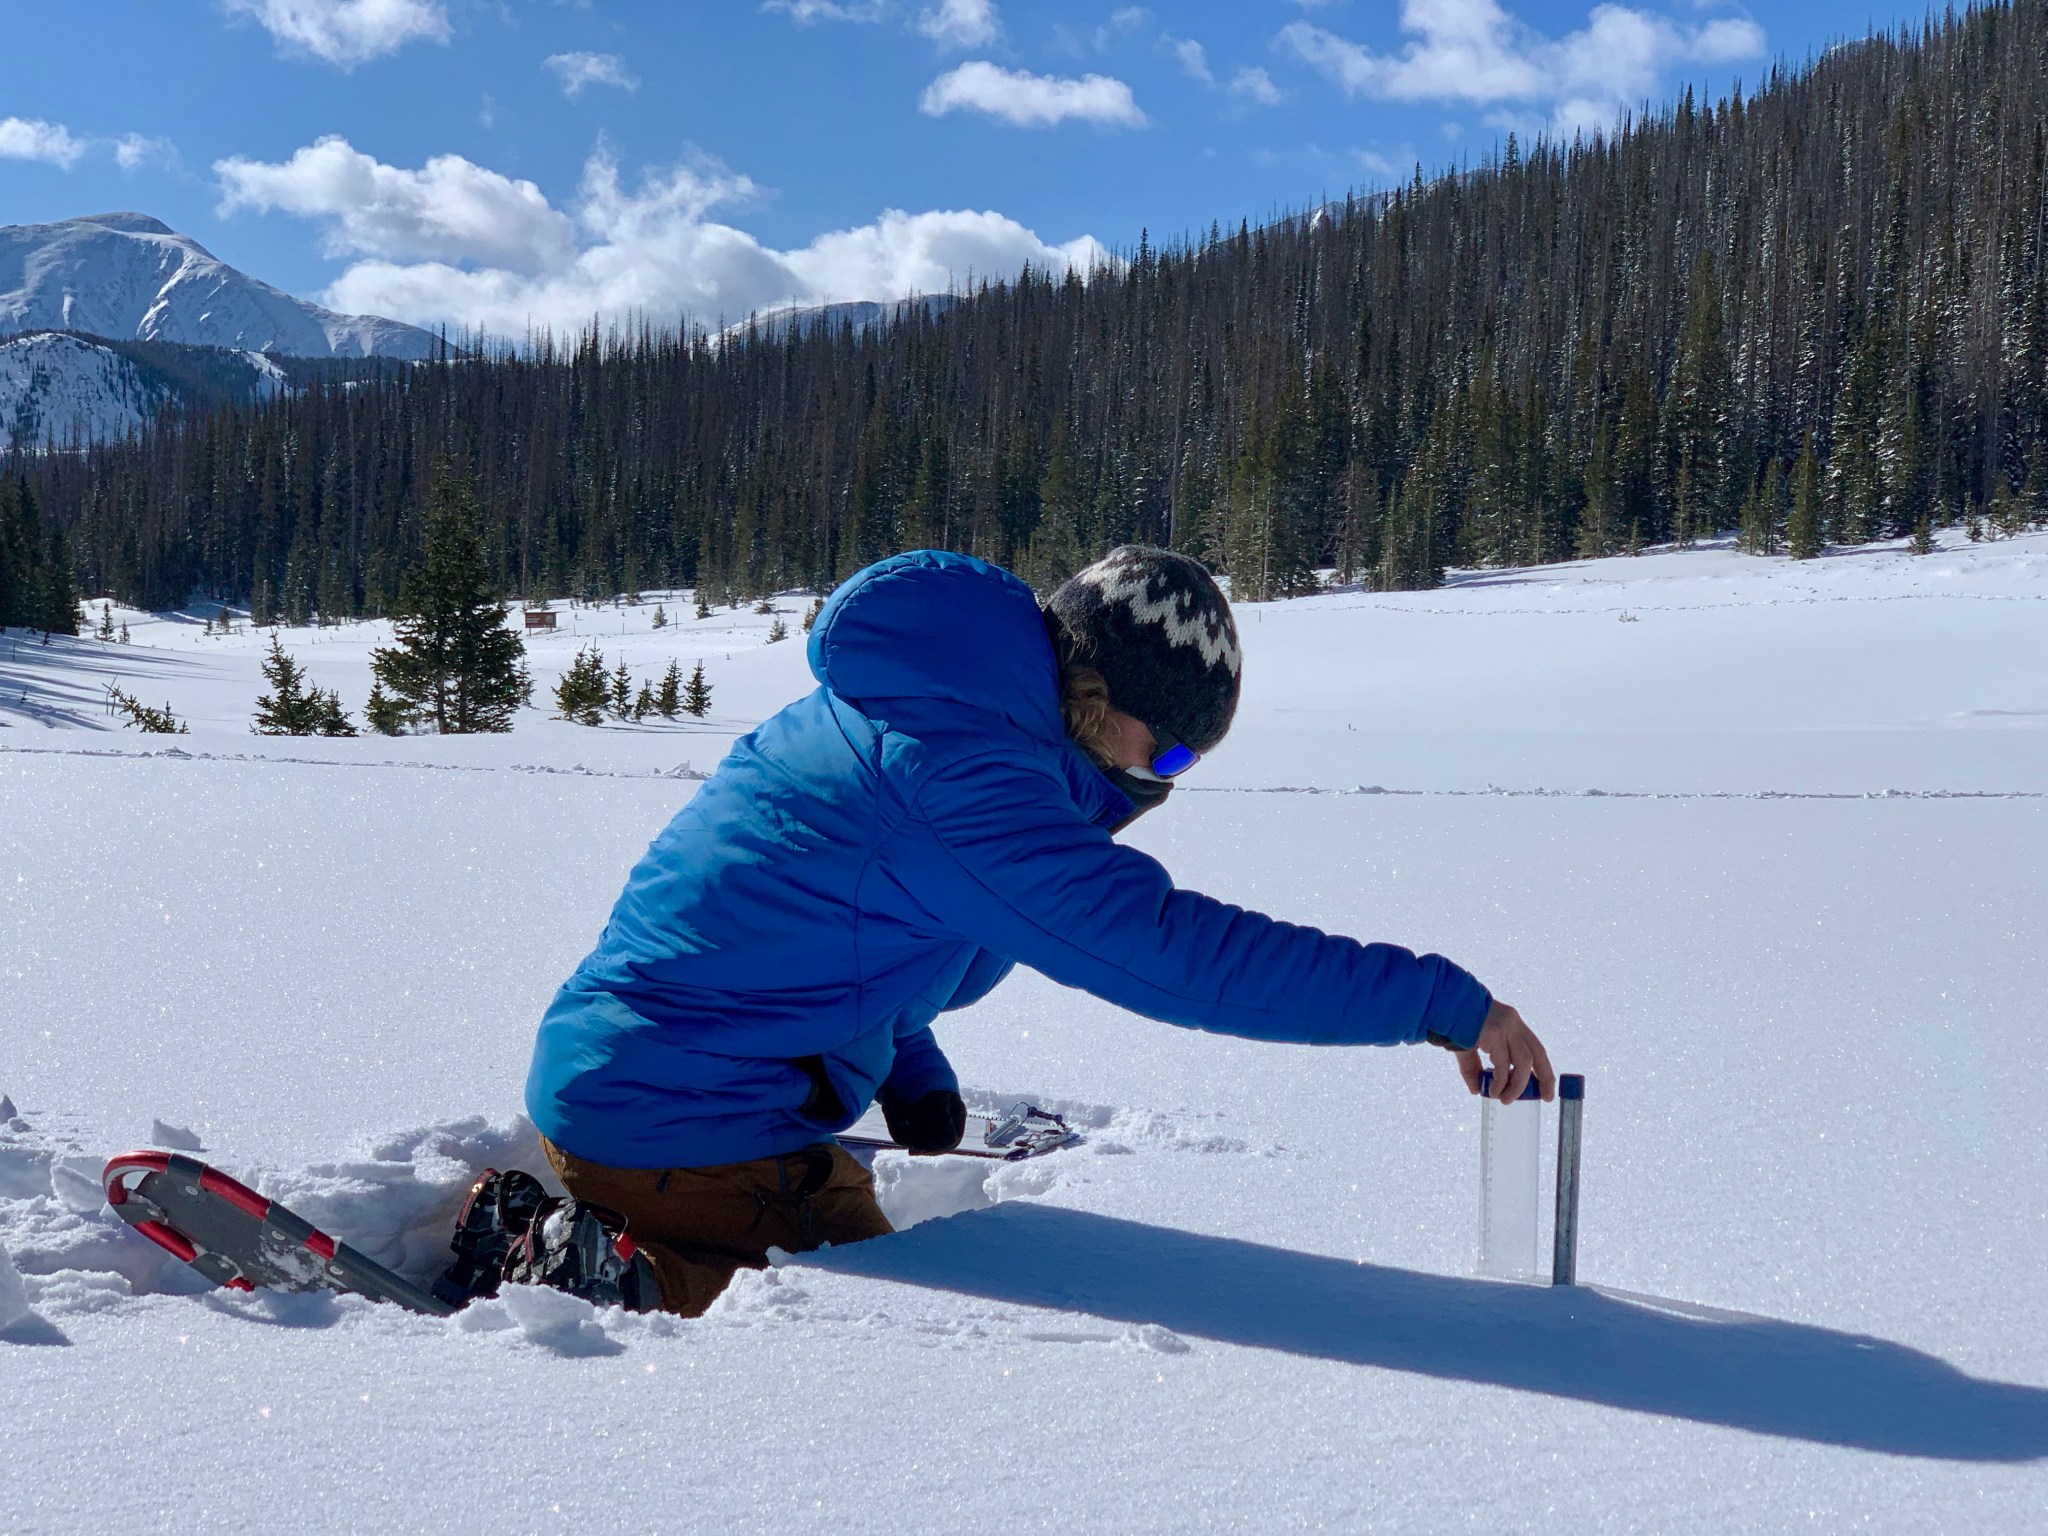 A student in winter gear and snowshoes kneels in deep snow, reaching forward to press a cylinder with measurement markings into the snow to measure depth. It is a sunny day, and in the background, gray-green trees slope upward toward blue, snow-covered mountains and a bright blue sky with white clouds.